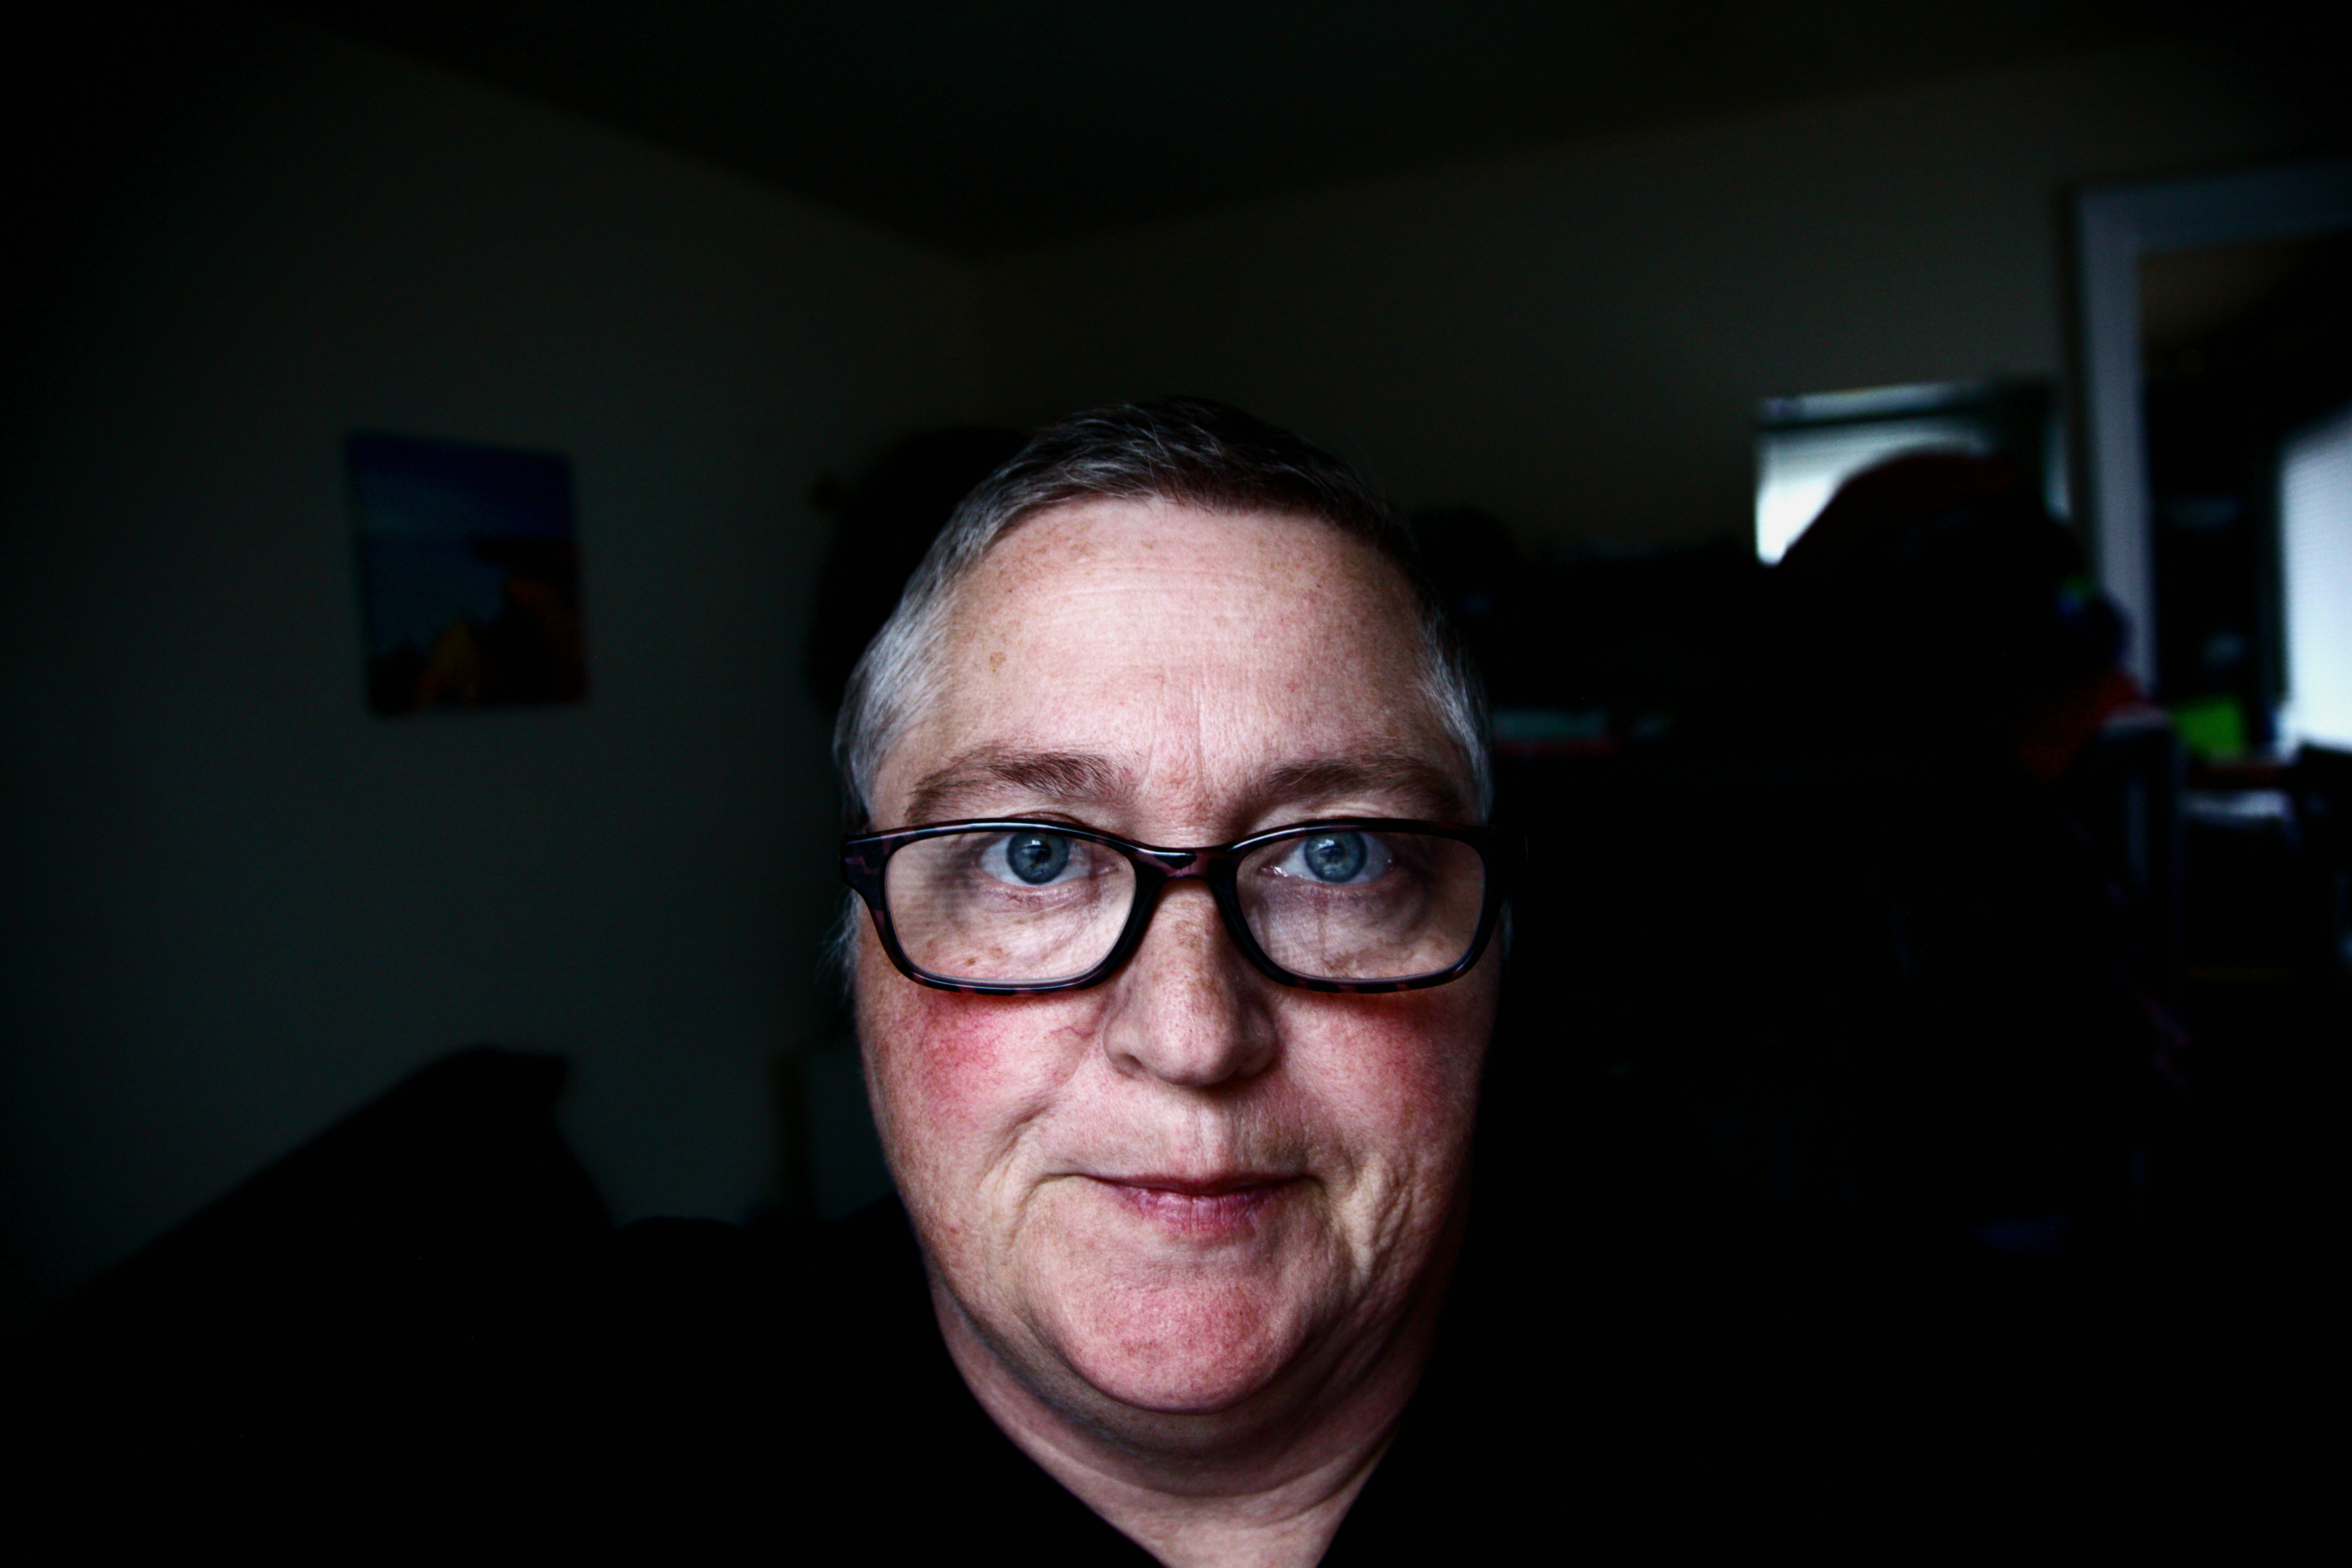 Oh yes, all of my age spots, spider veins, wrinkles and crow's feet and rosacea! A perfect portrait. I am staying home during the COVID-19 pandemic. Plan to see more of my fabulous mug. Fabulous at 50 years old!